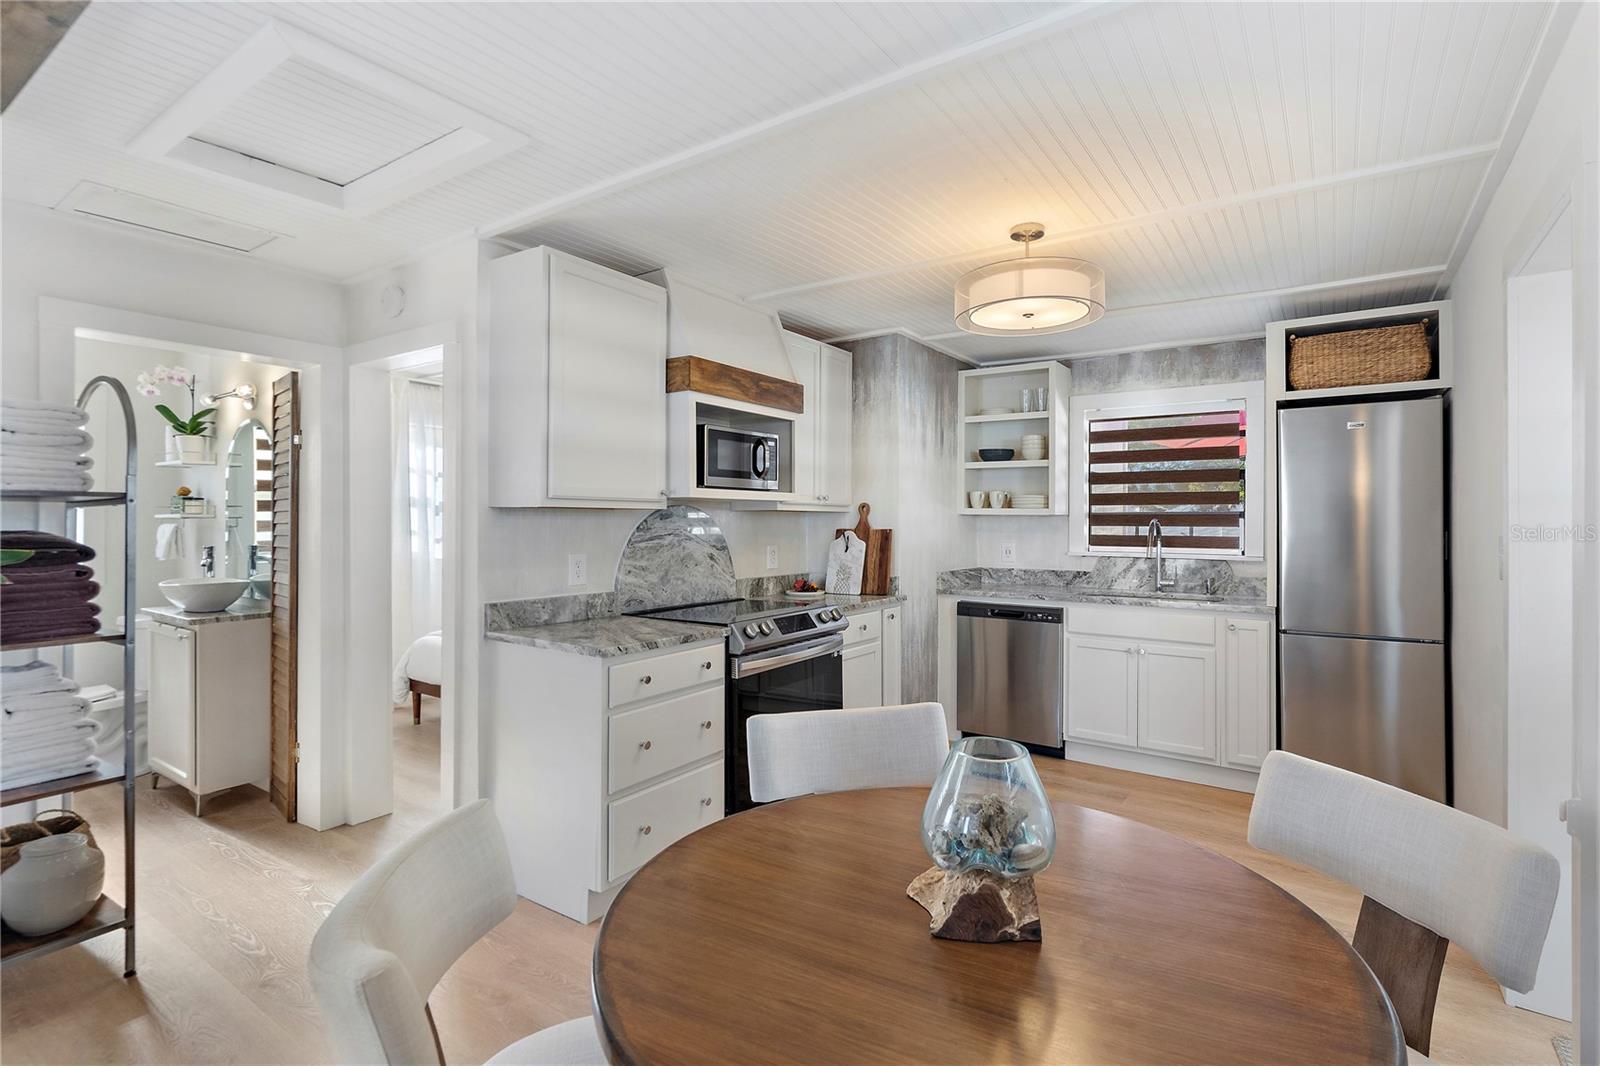 The kitchen features a full suite of BRAND NEW appliances, a stunning light fixture and granite counters with a smooth, polished finish exuding a timeless elegance and sophistication.